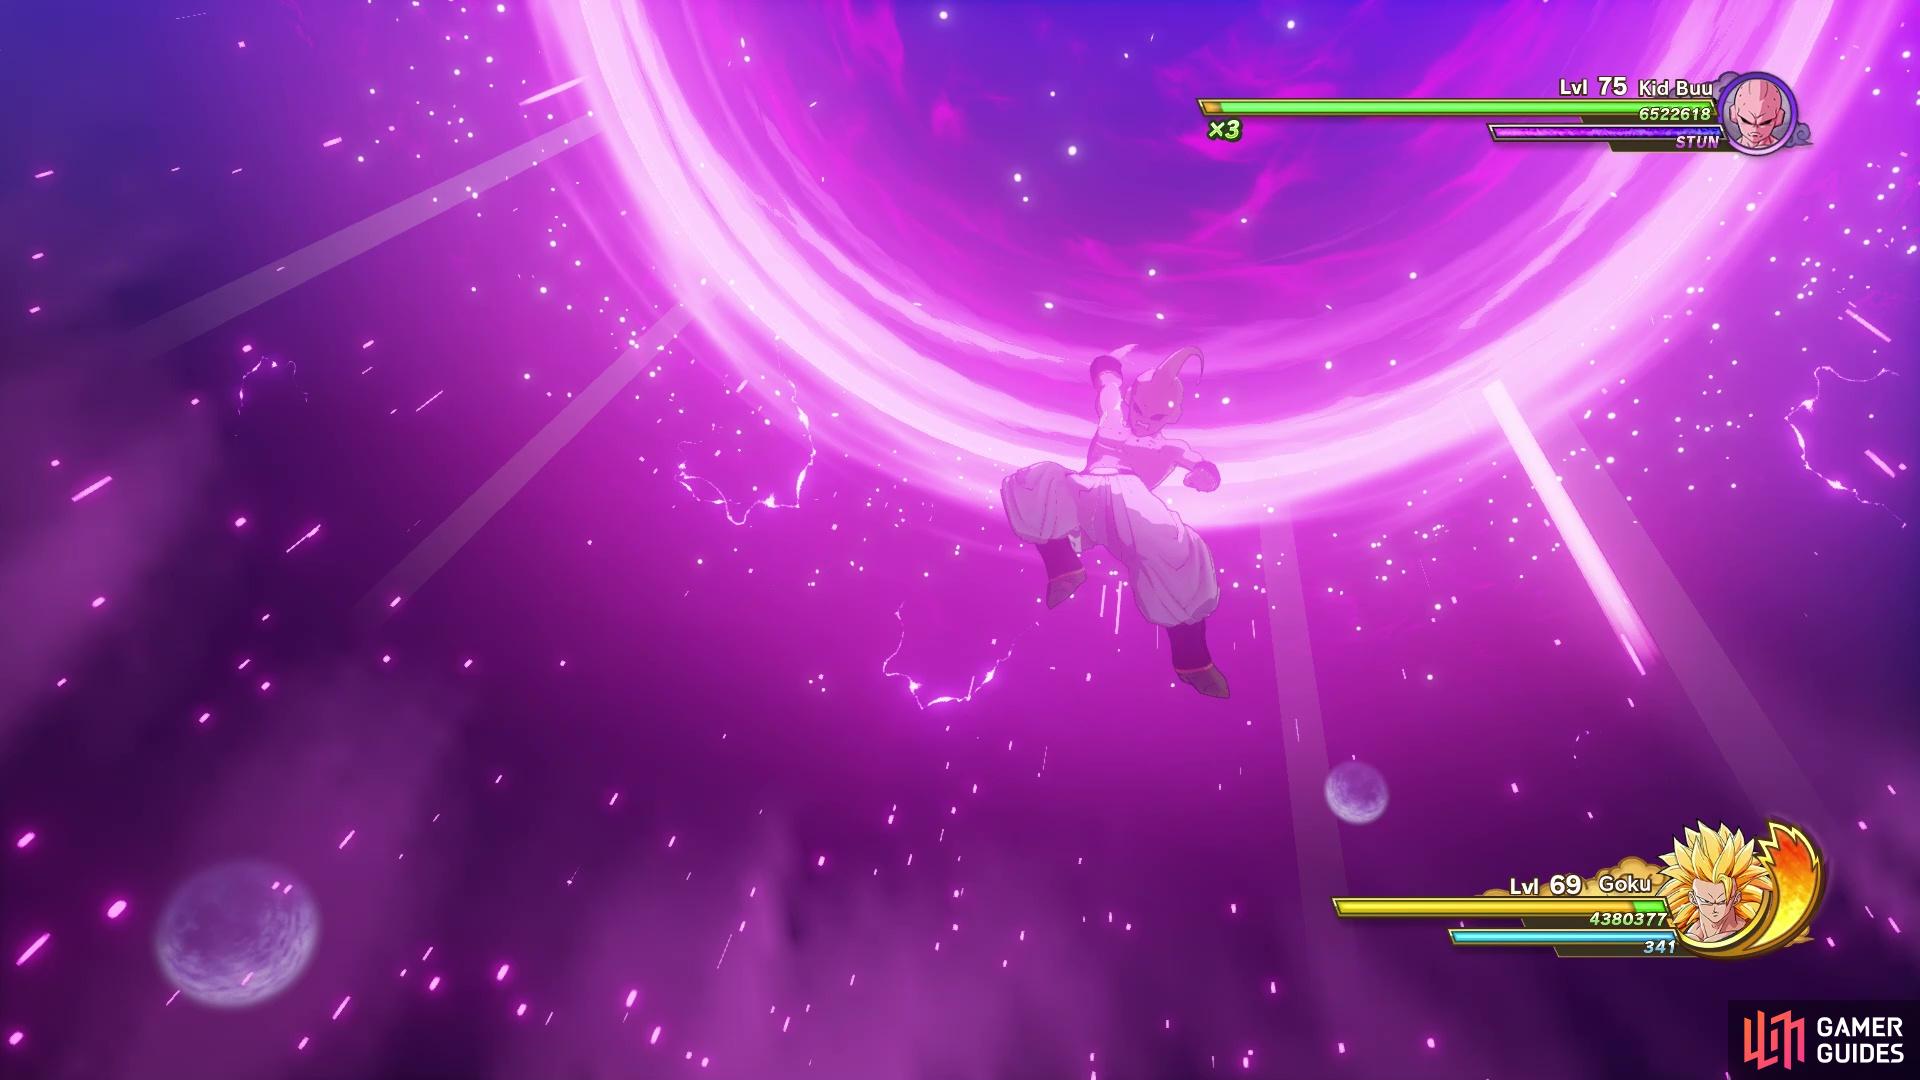 Planet Burst is pretty much Buu's signature attack in this fight